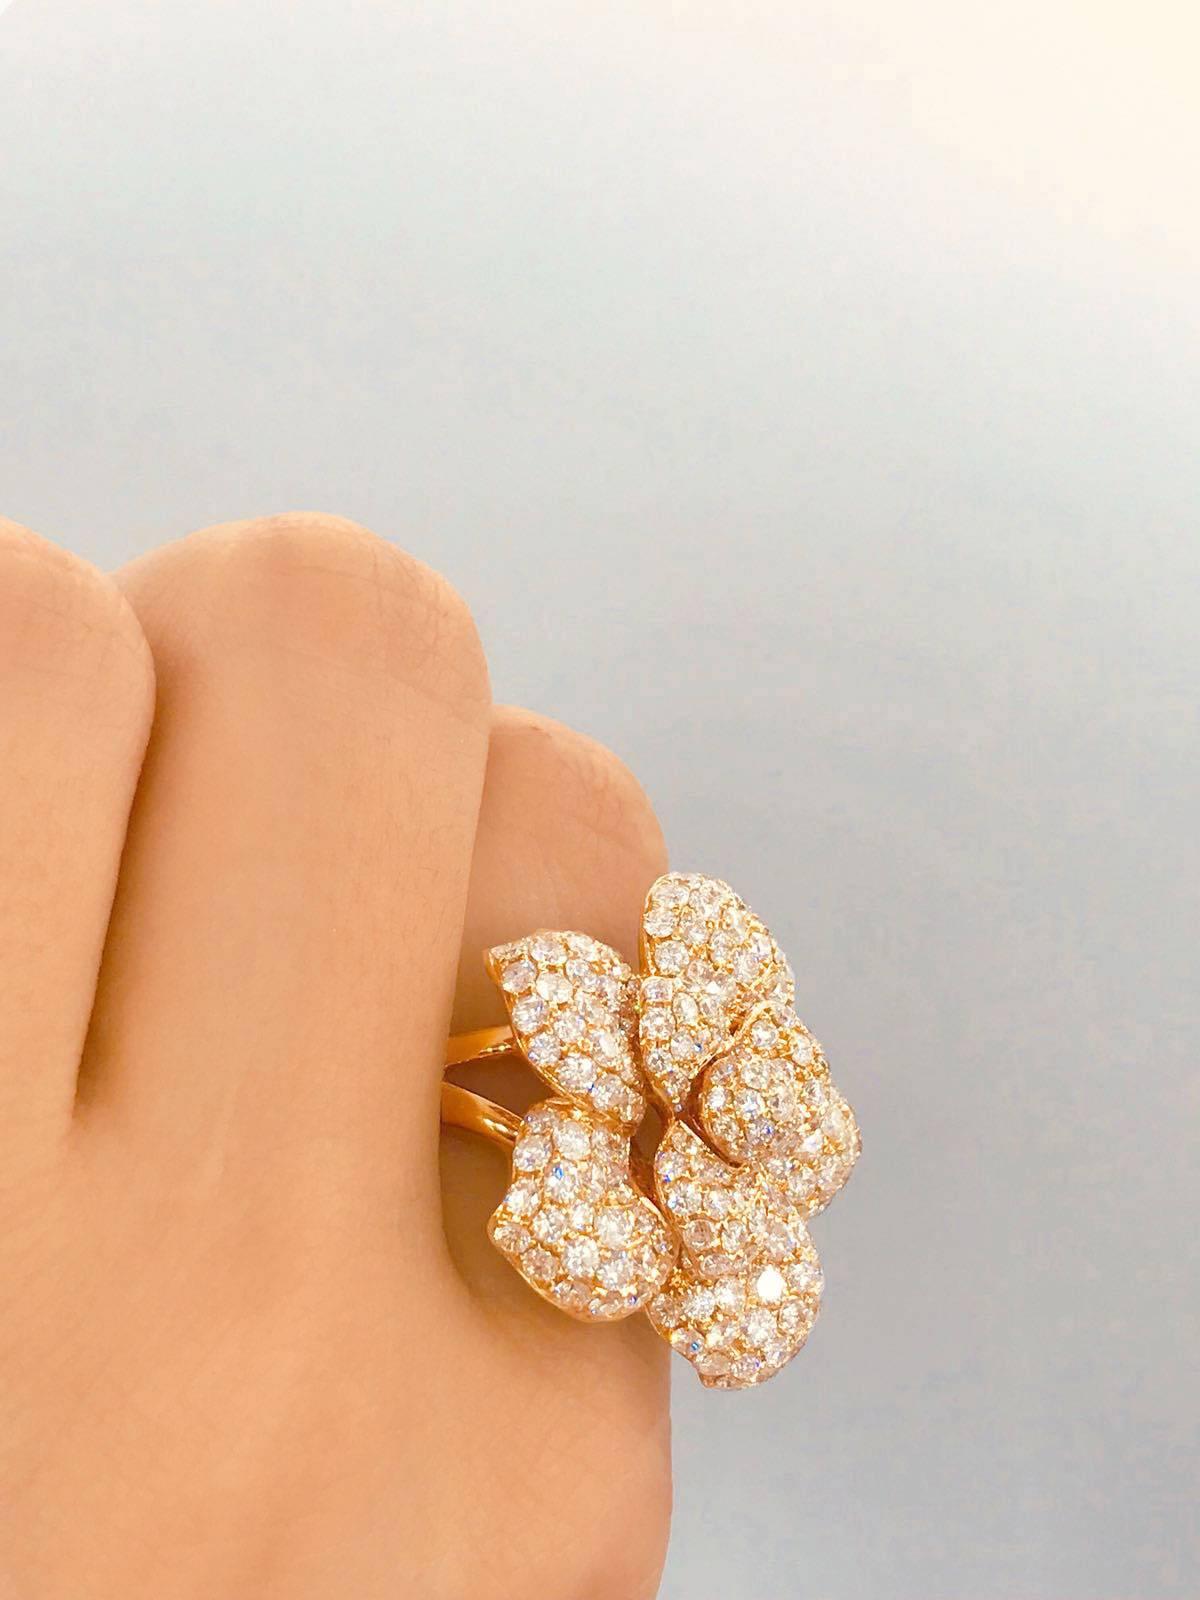 Can be ordered in 18k white/yellow gold. Approx total weight: 4.44 cts
Diamond Color: E-F
Diamond Clarity: Vvs1 
Cut: Excellent 
As noted we are vetted and rated a Top Seller on 1stdibs falling into the top 25% of dealers listed here.
Appraisal from